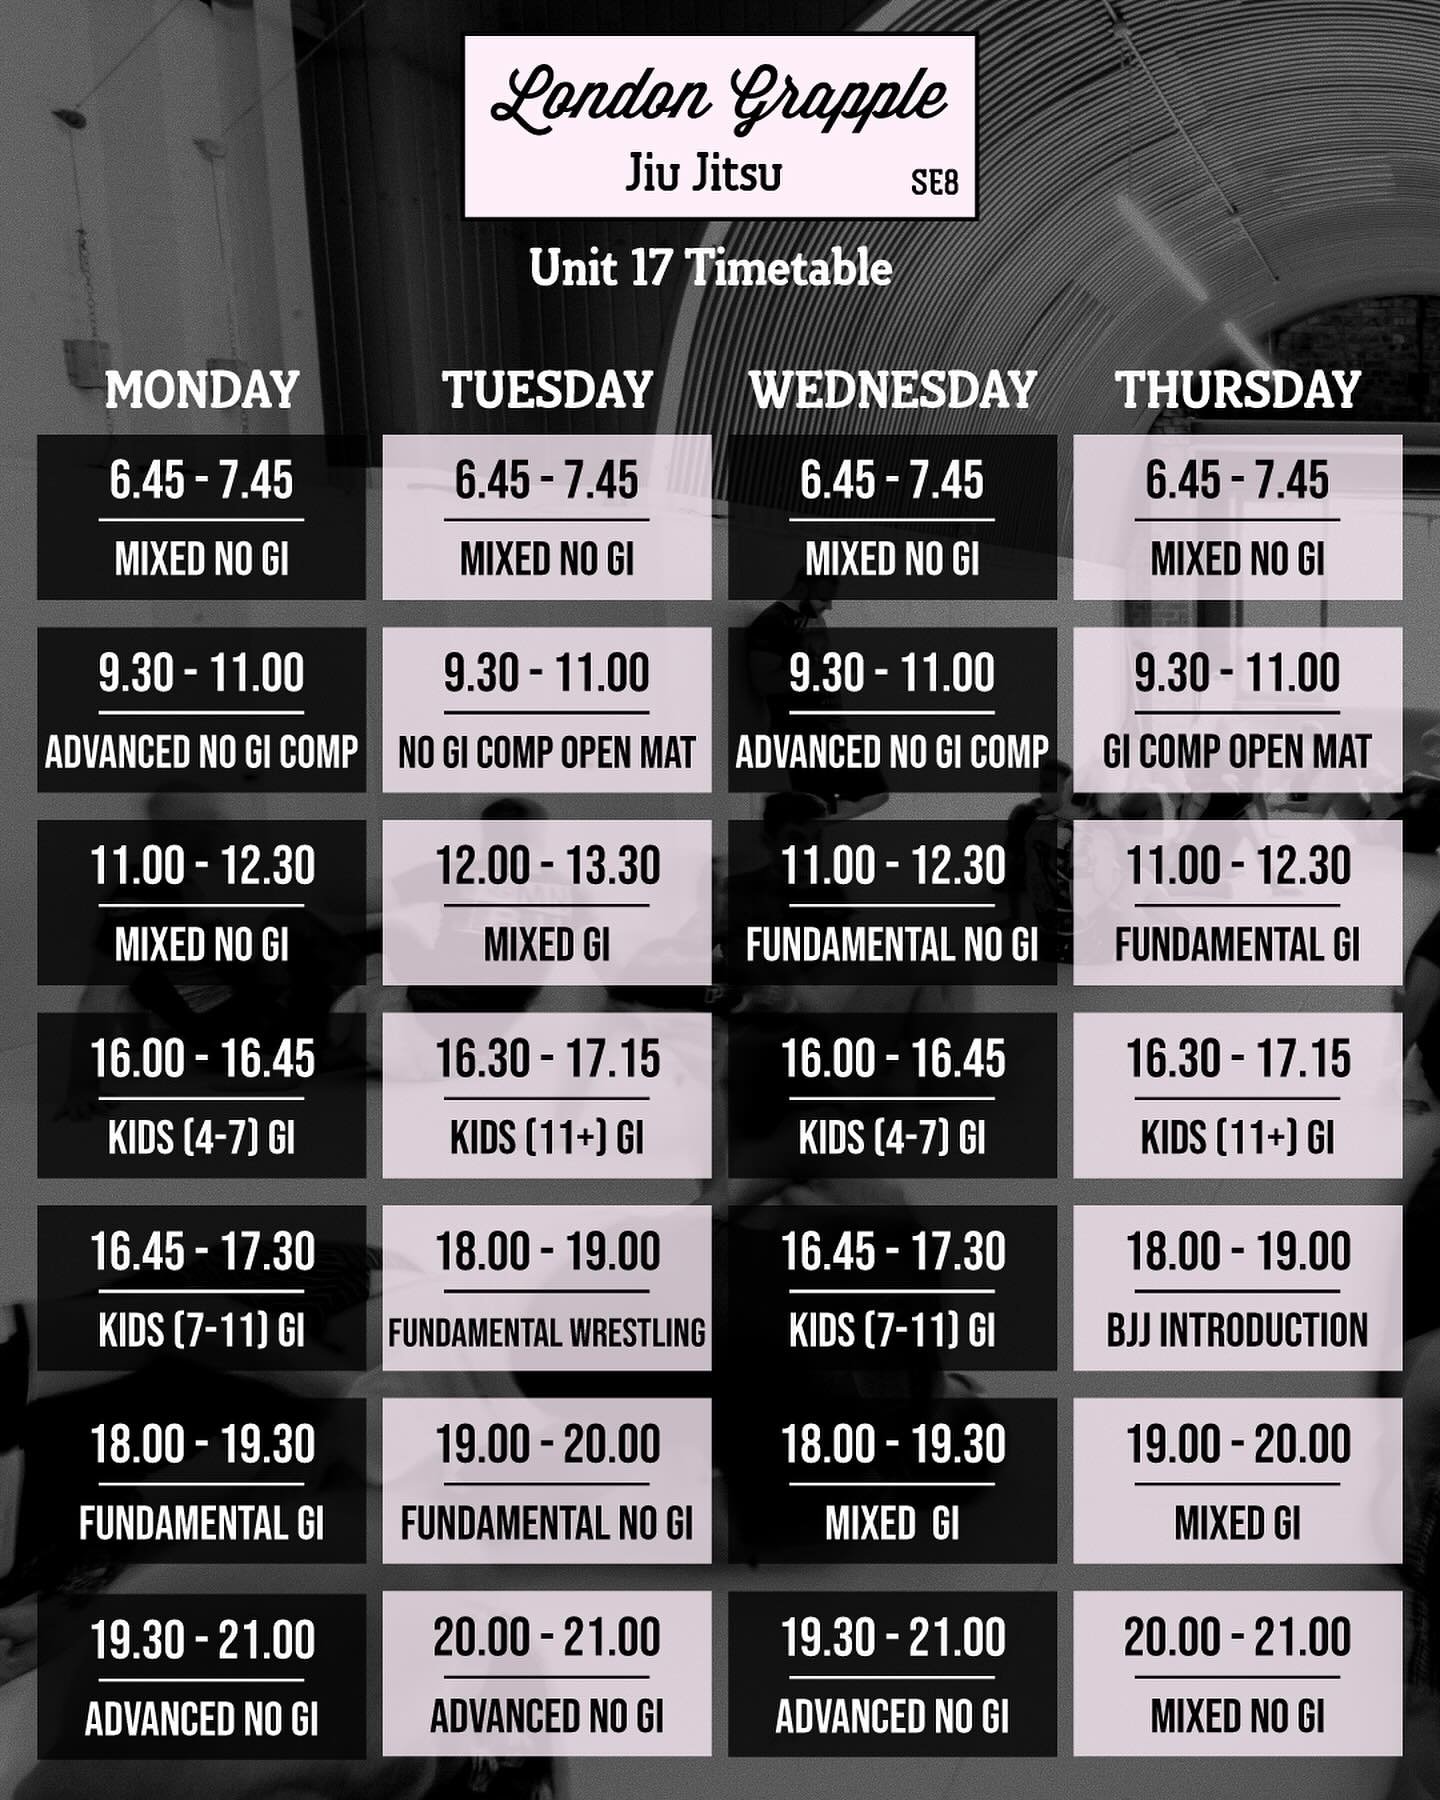 Unit 17 (Mat 1) Timetable❗️

New timetable is live from 07/05 💪

#bjj #wrestling #mma #muaythai #grappling